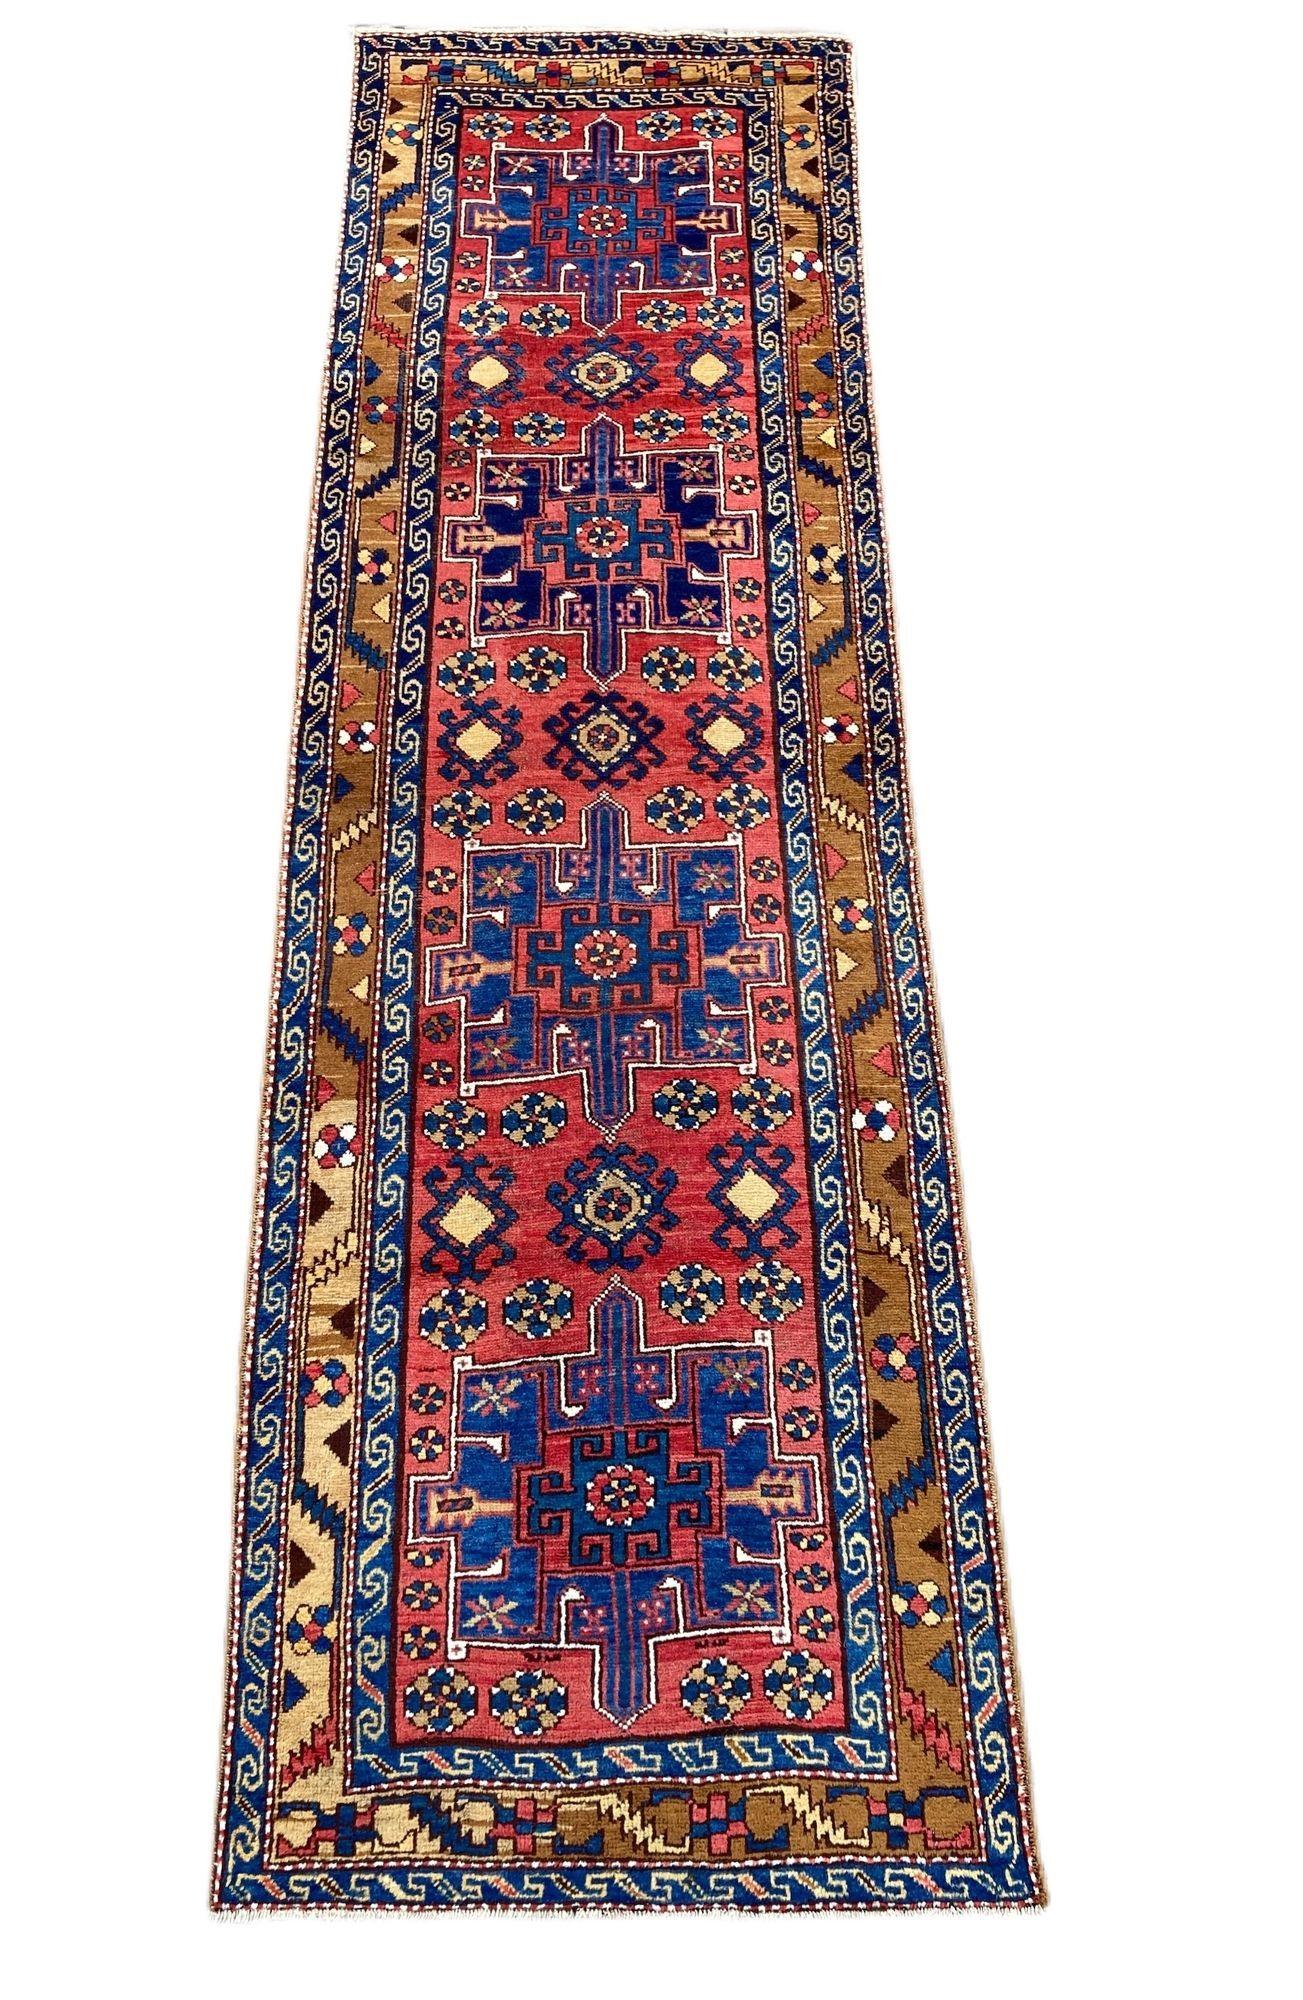 A lovely antique Heriz runner, handwoven circa 1910 with a 4 medallion geometrical design on a terracotta red field and unusual camel border. Lovely wool quality and fabulous secondary colours.
Size: 3.28m x 0.98m (10ft 10in x 3ft 3in)
This rug is